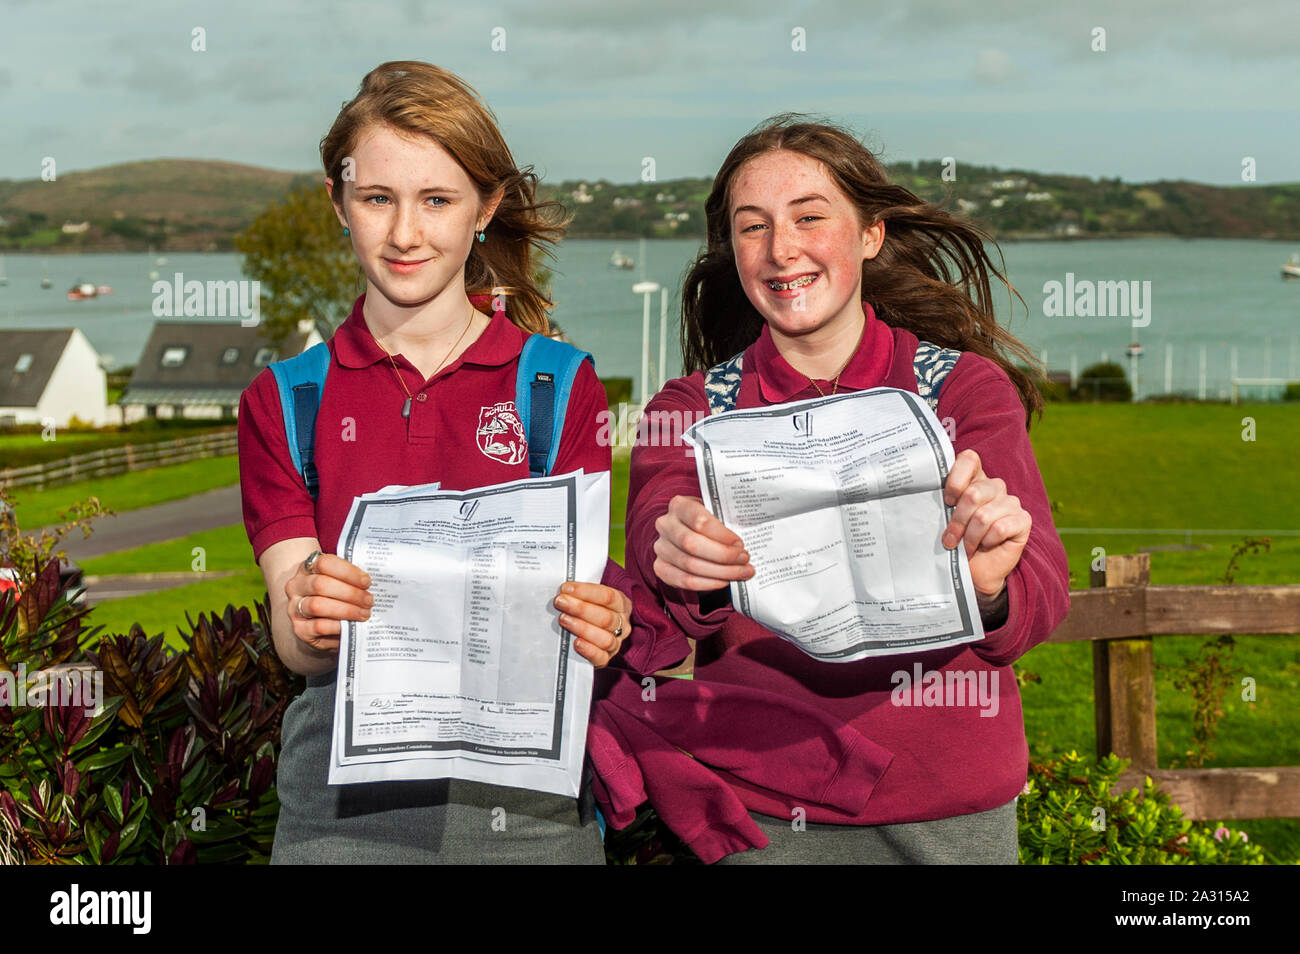 Schull, West Cork, Ireland. 4th Oct, 2019. Over 64,000 students around Ireland received their Junior Cert results this afternoon. In Schull Community College, West Cork, many students were beside themselves with happiness on seeing their results. Pictured with their results are Belle Melvin-Caird, Ballydehob and Madeline Stanley, Schull. Credit: Andy Gibson/Alamy Live News. Stock Photo